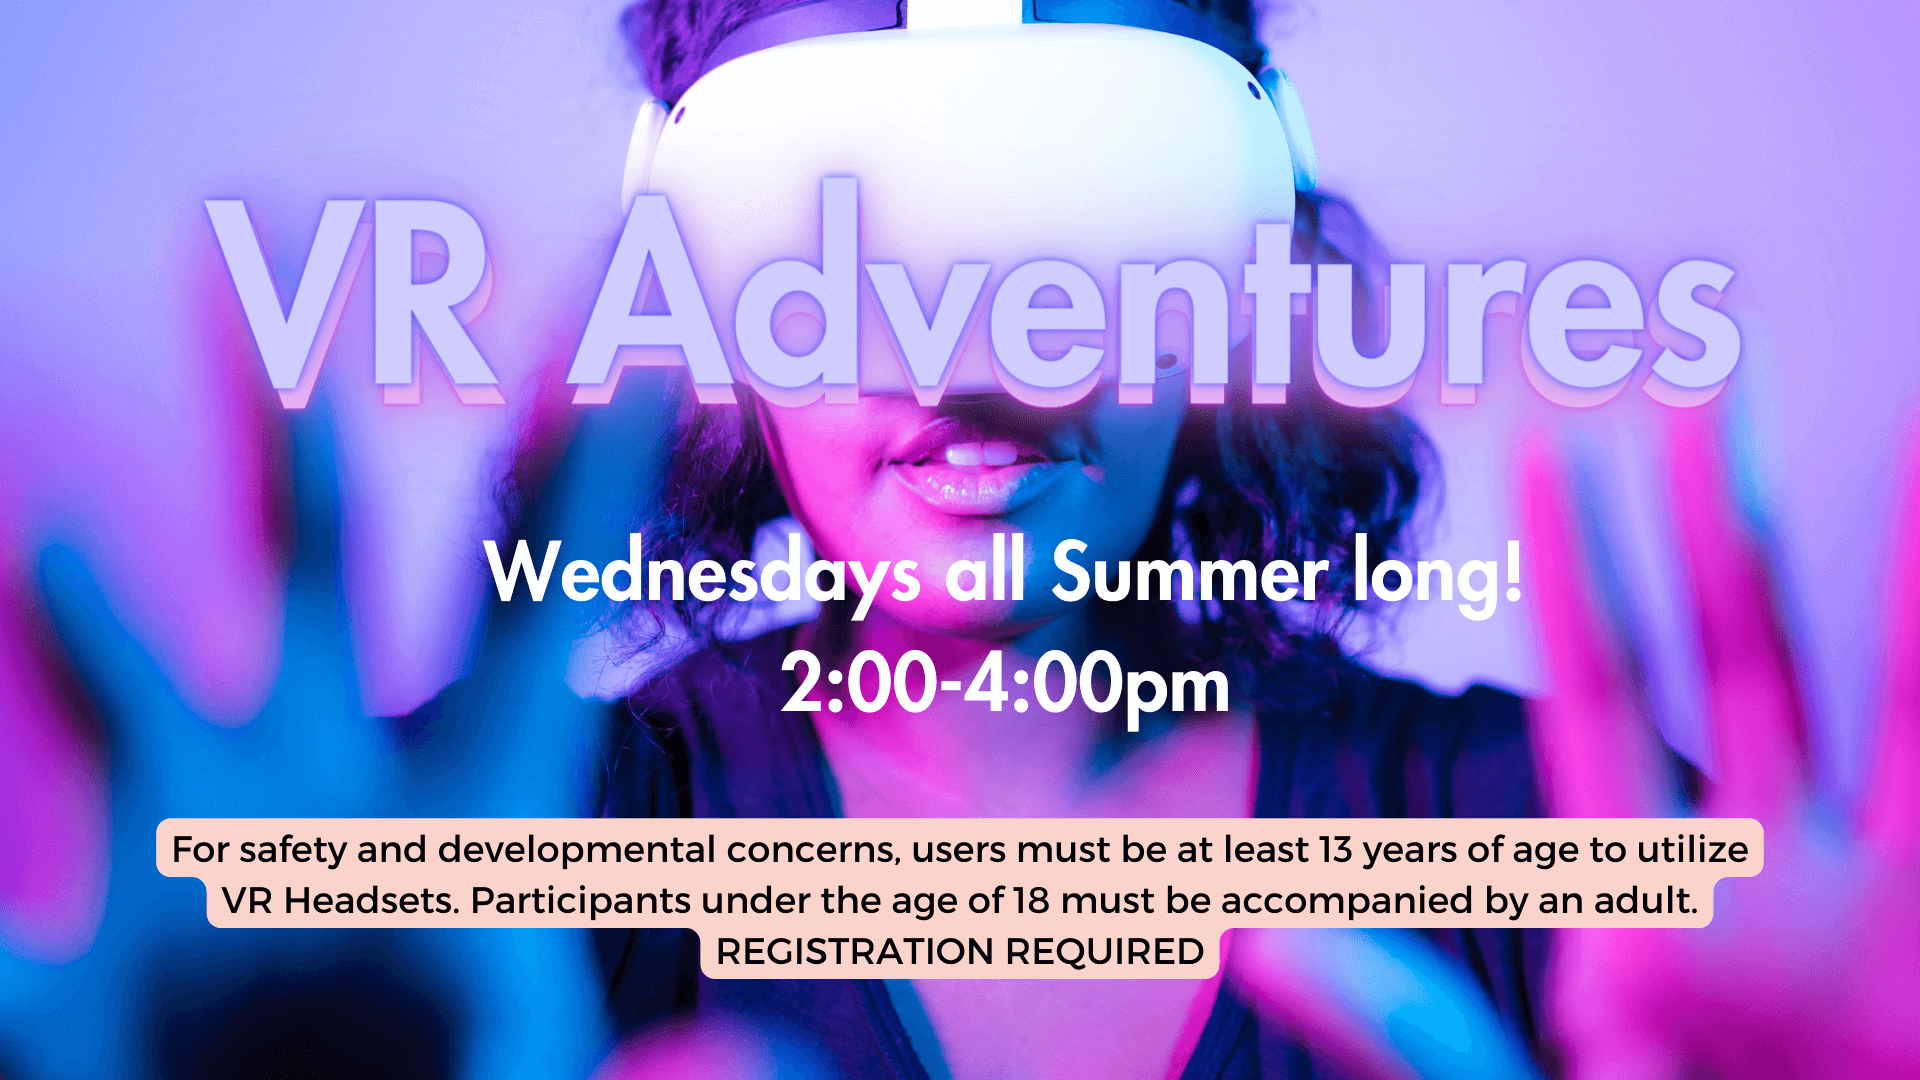 Advertisement for 'VR Adventures' happening Wednesdays all summer long from 2:00 to 4:00 PM. The image features a person wearing a virtual reality headset with a background in purple and blue hues. Text at the bottom indicates safety guidelines: users must be at least 13 years old to use VR headsets, and participants under 18 must be accompanied by an adult. Registration is required.